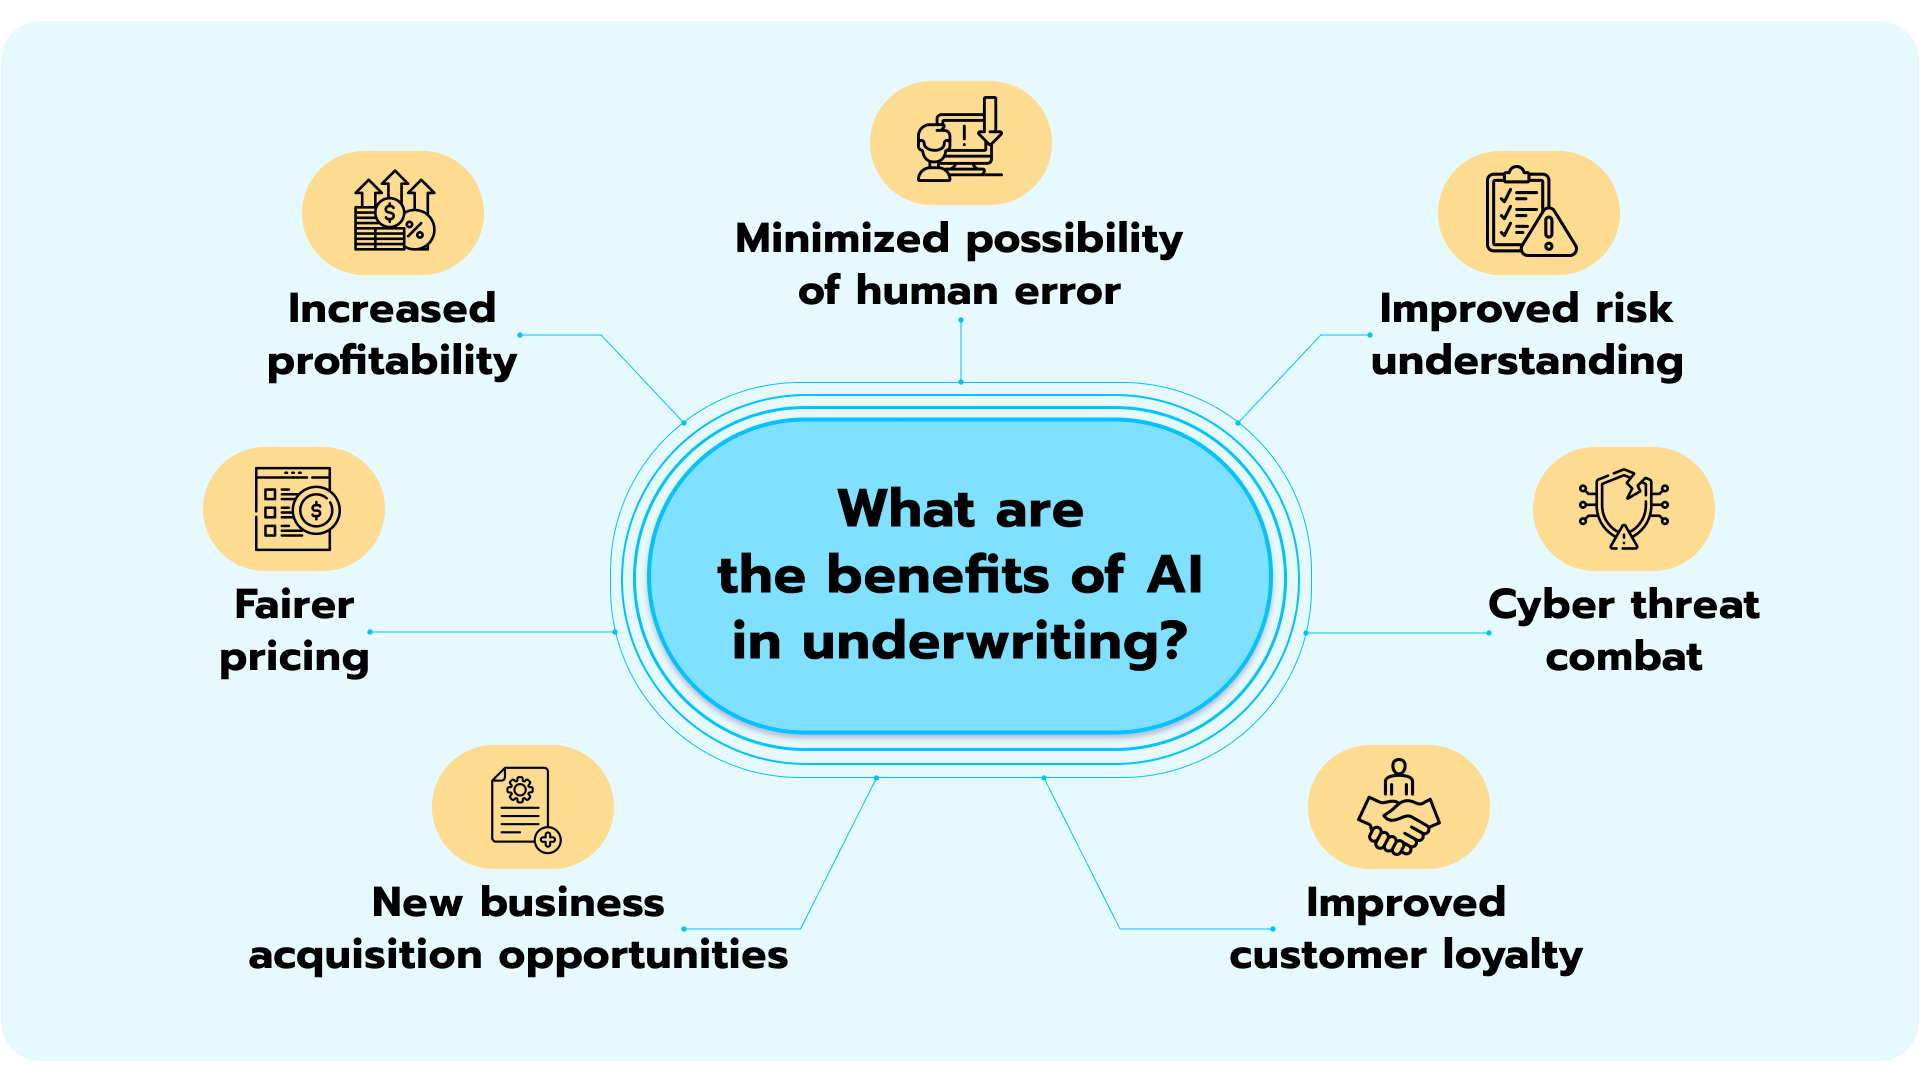 Benefits of AI in underwriting